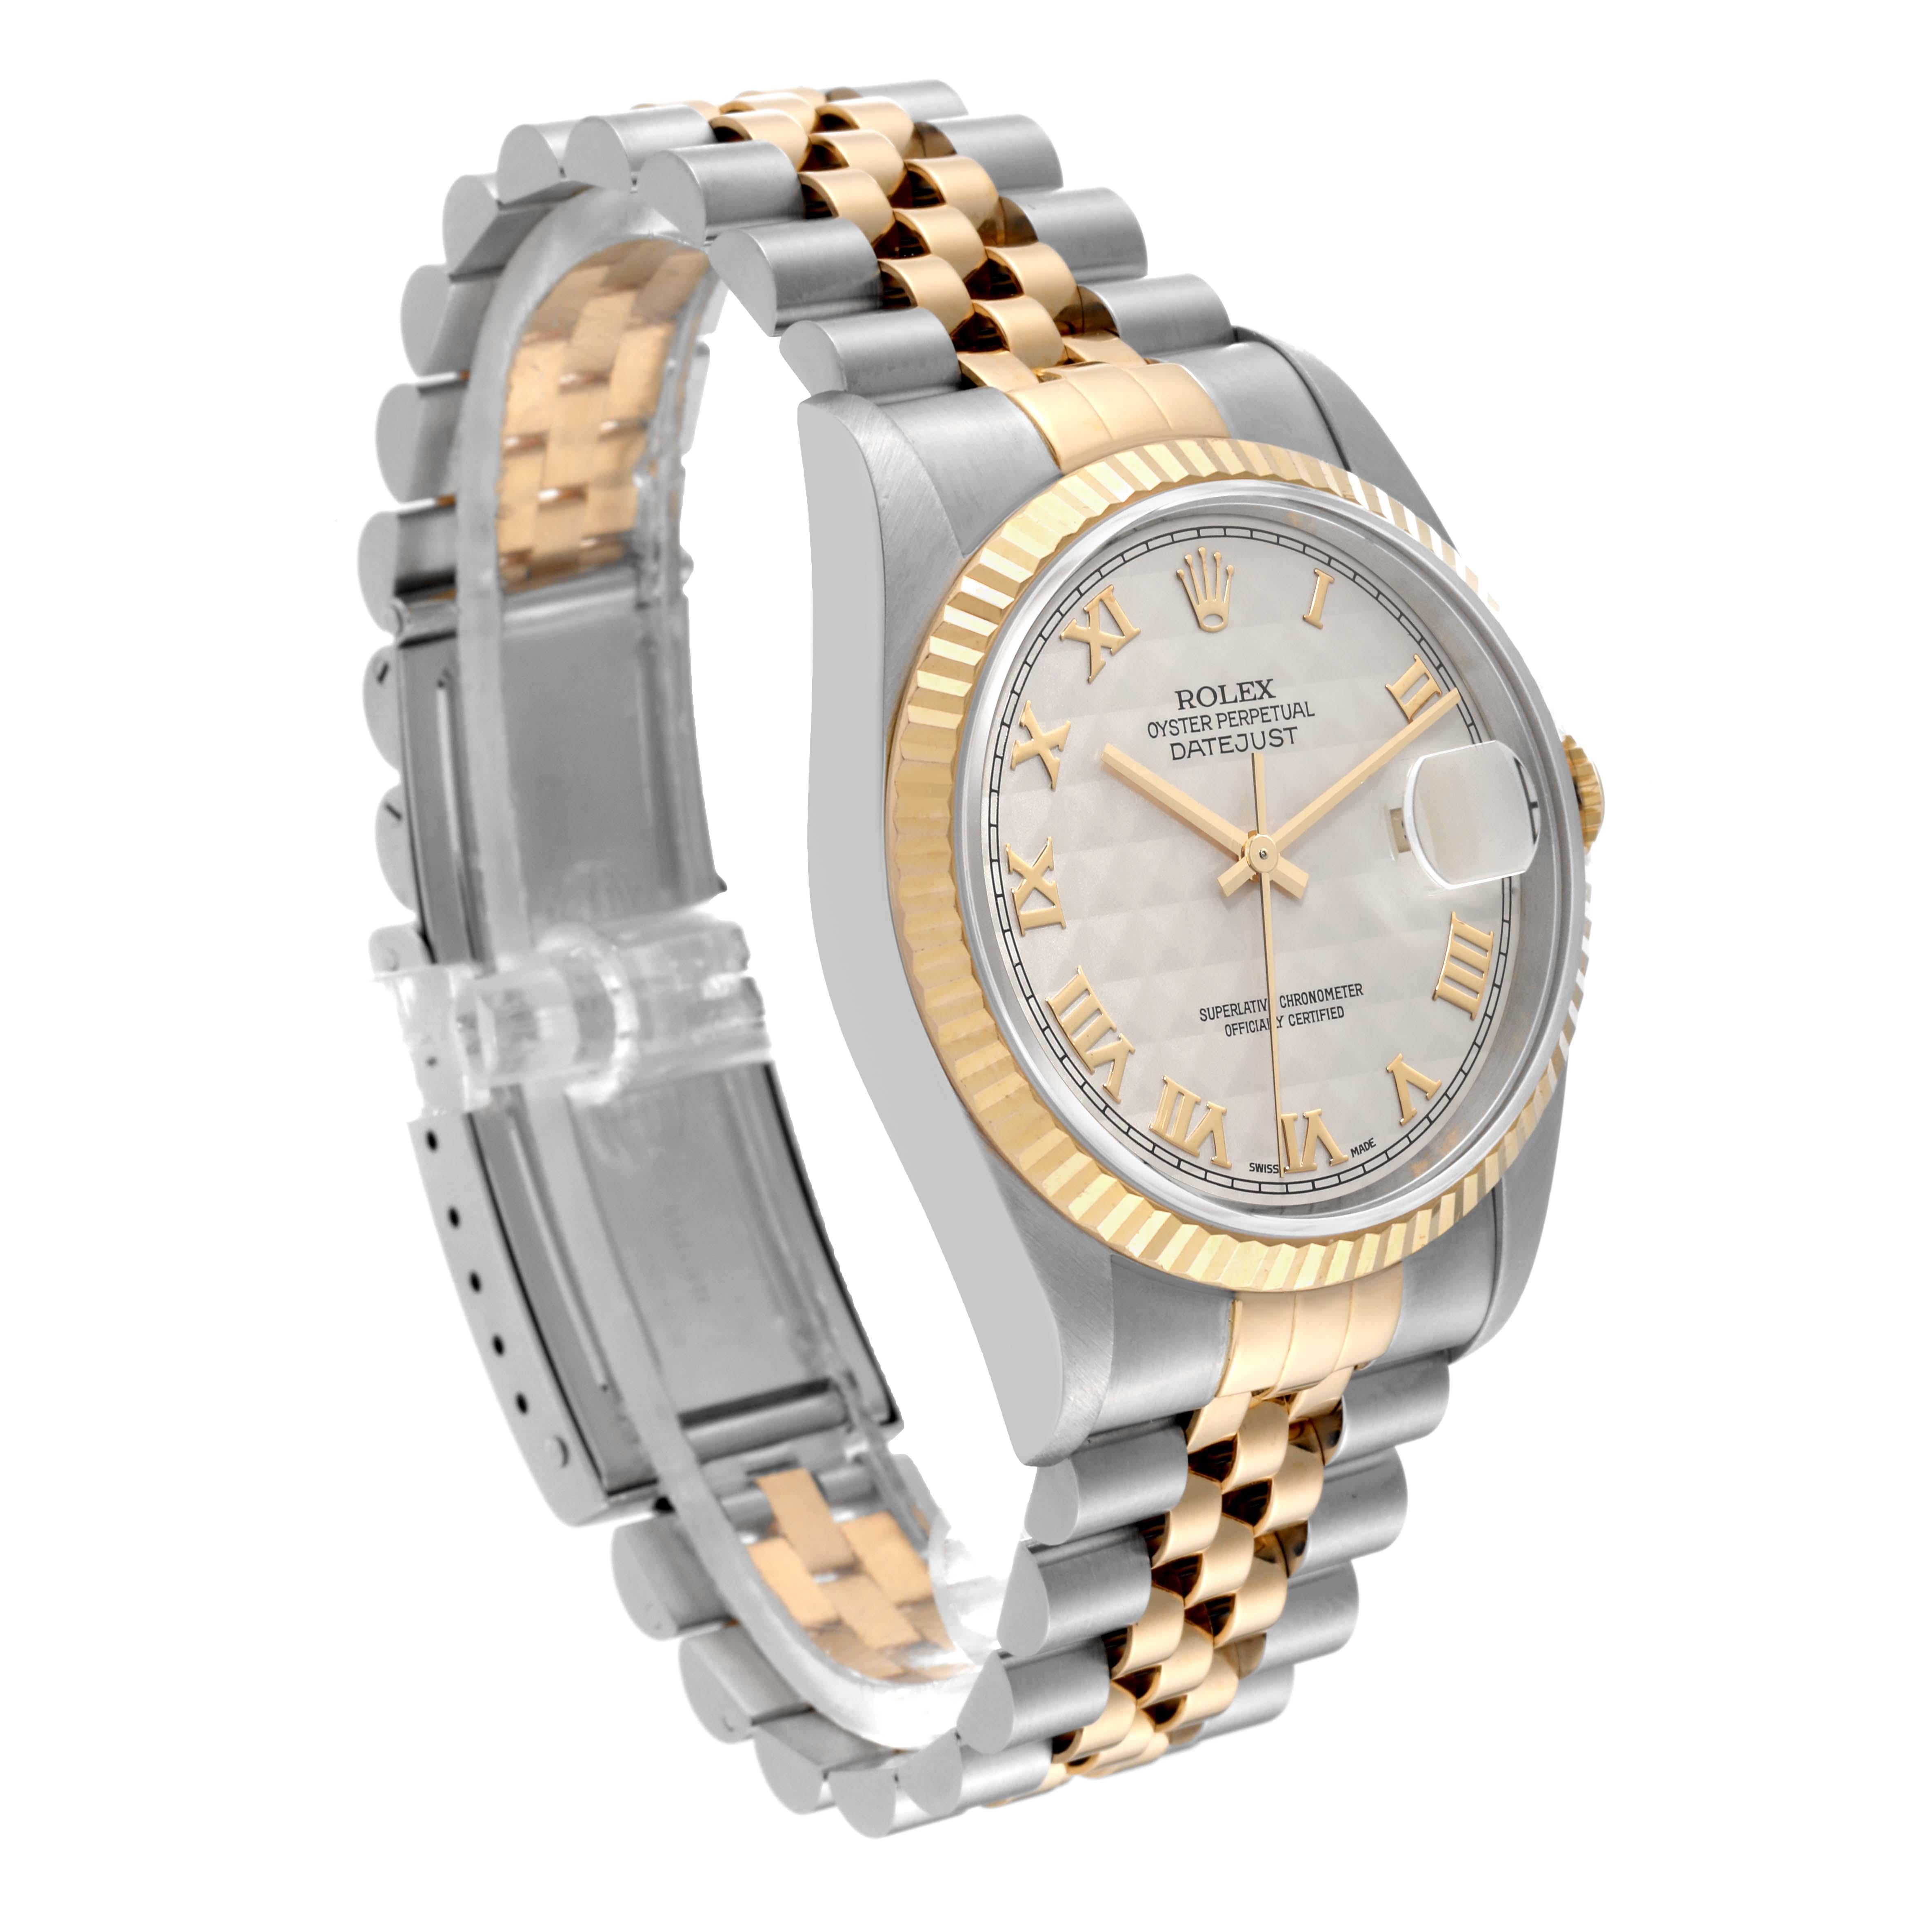 Rolex Datejust Steel Yellow Gold Ivory Pyramid Dial Mens Watch 16233 Box Papers en vente 8